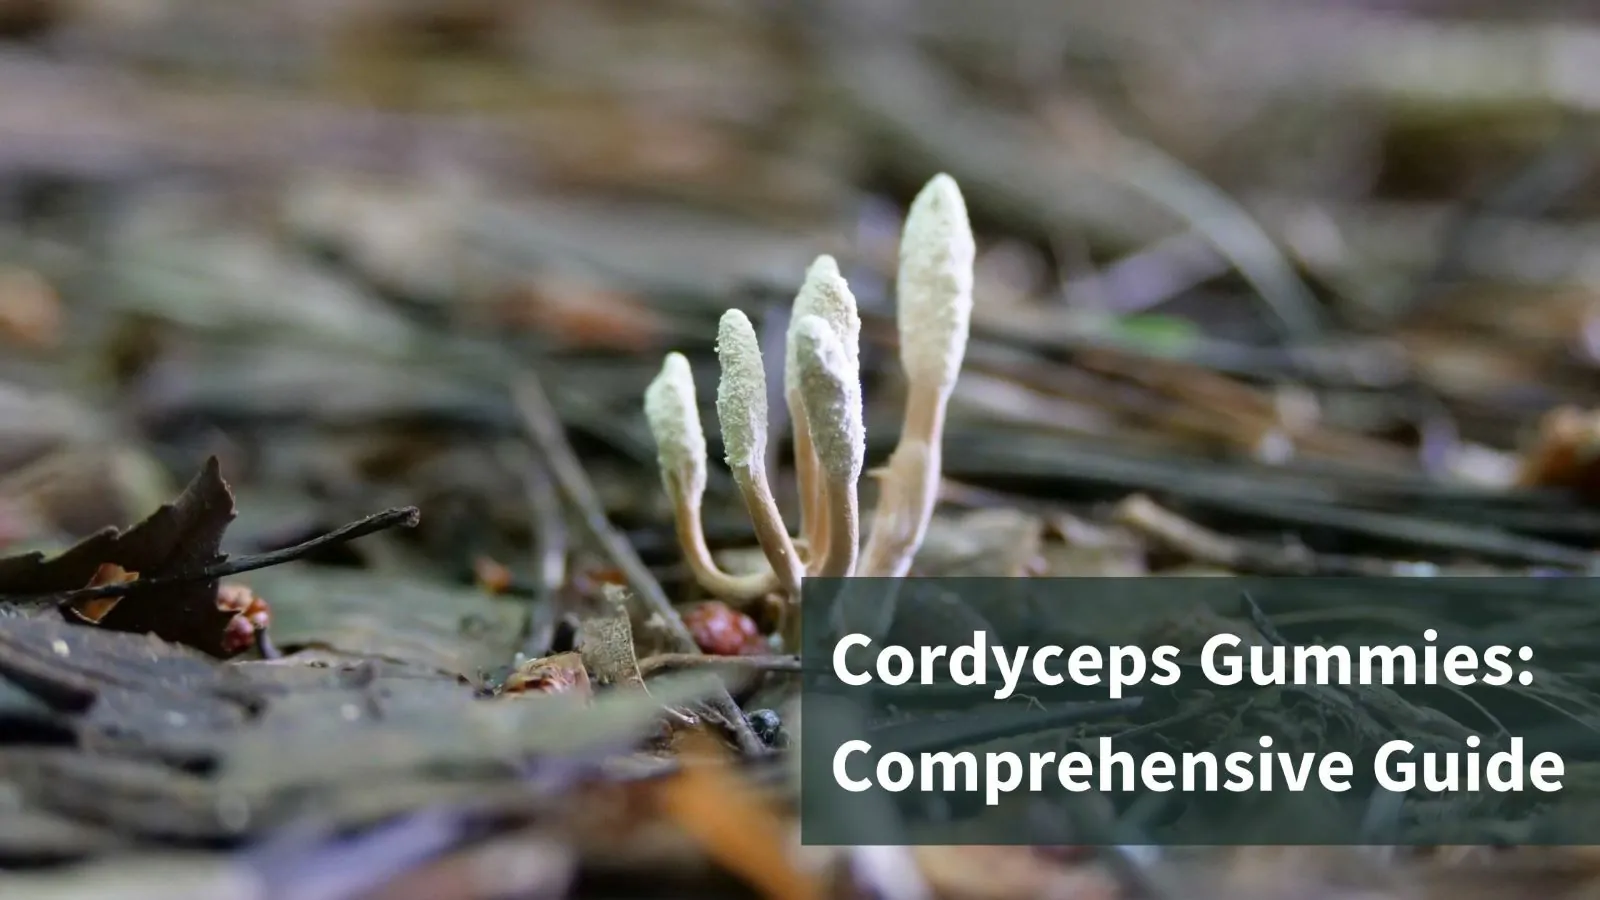 What Are Cordyceps Gummies And What Do They Do?